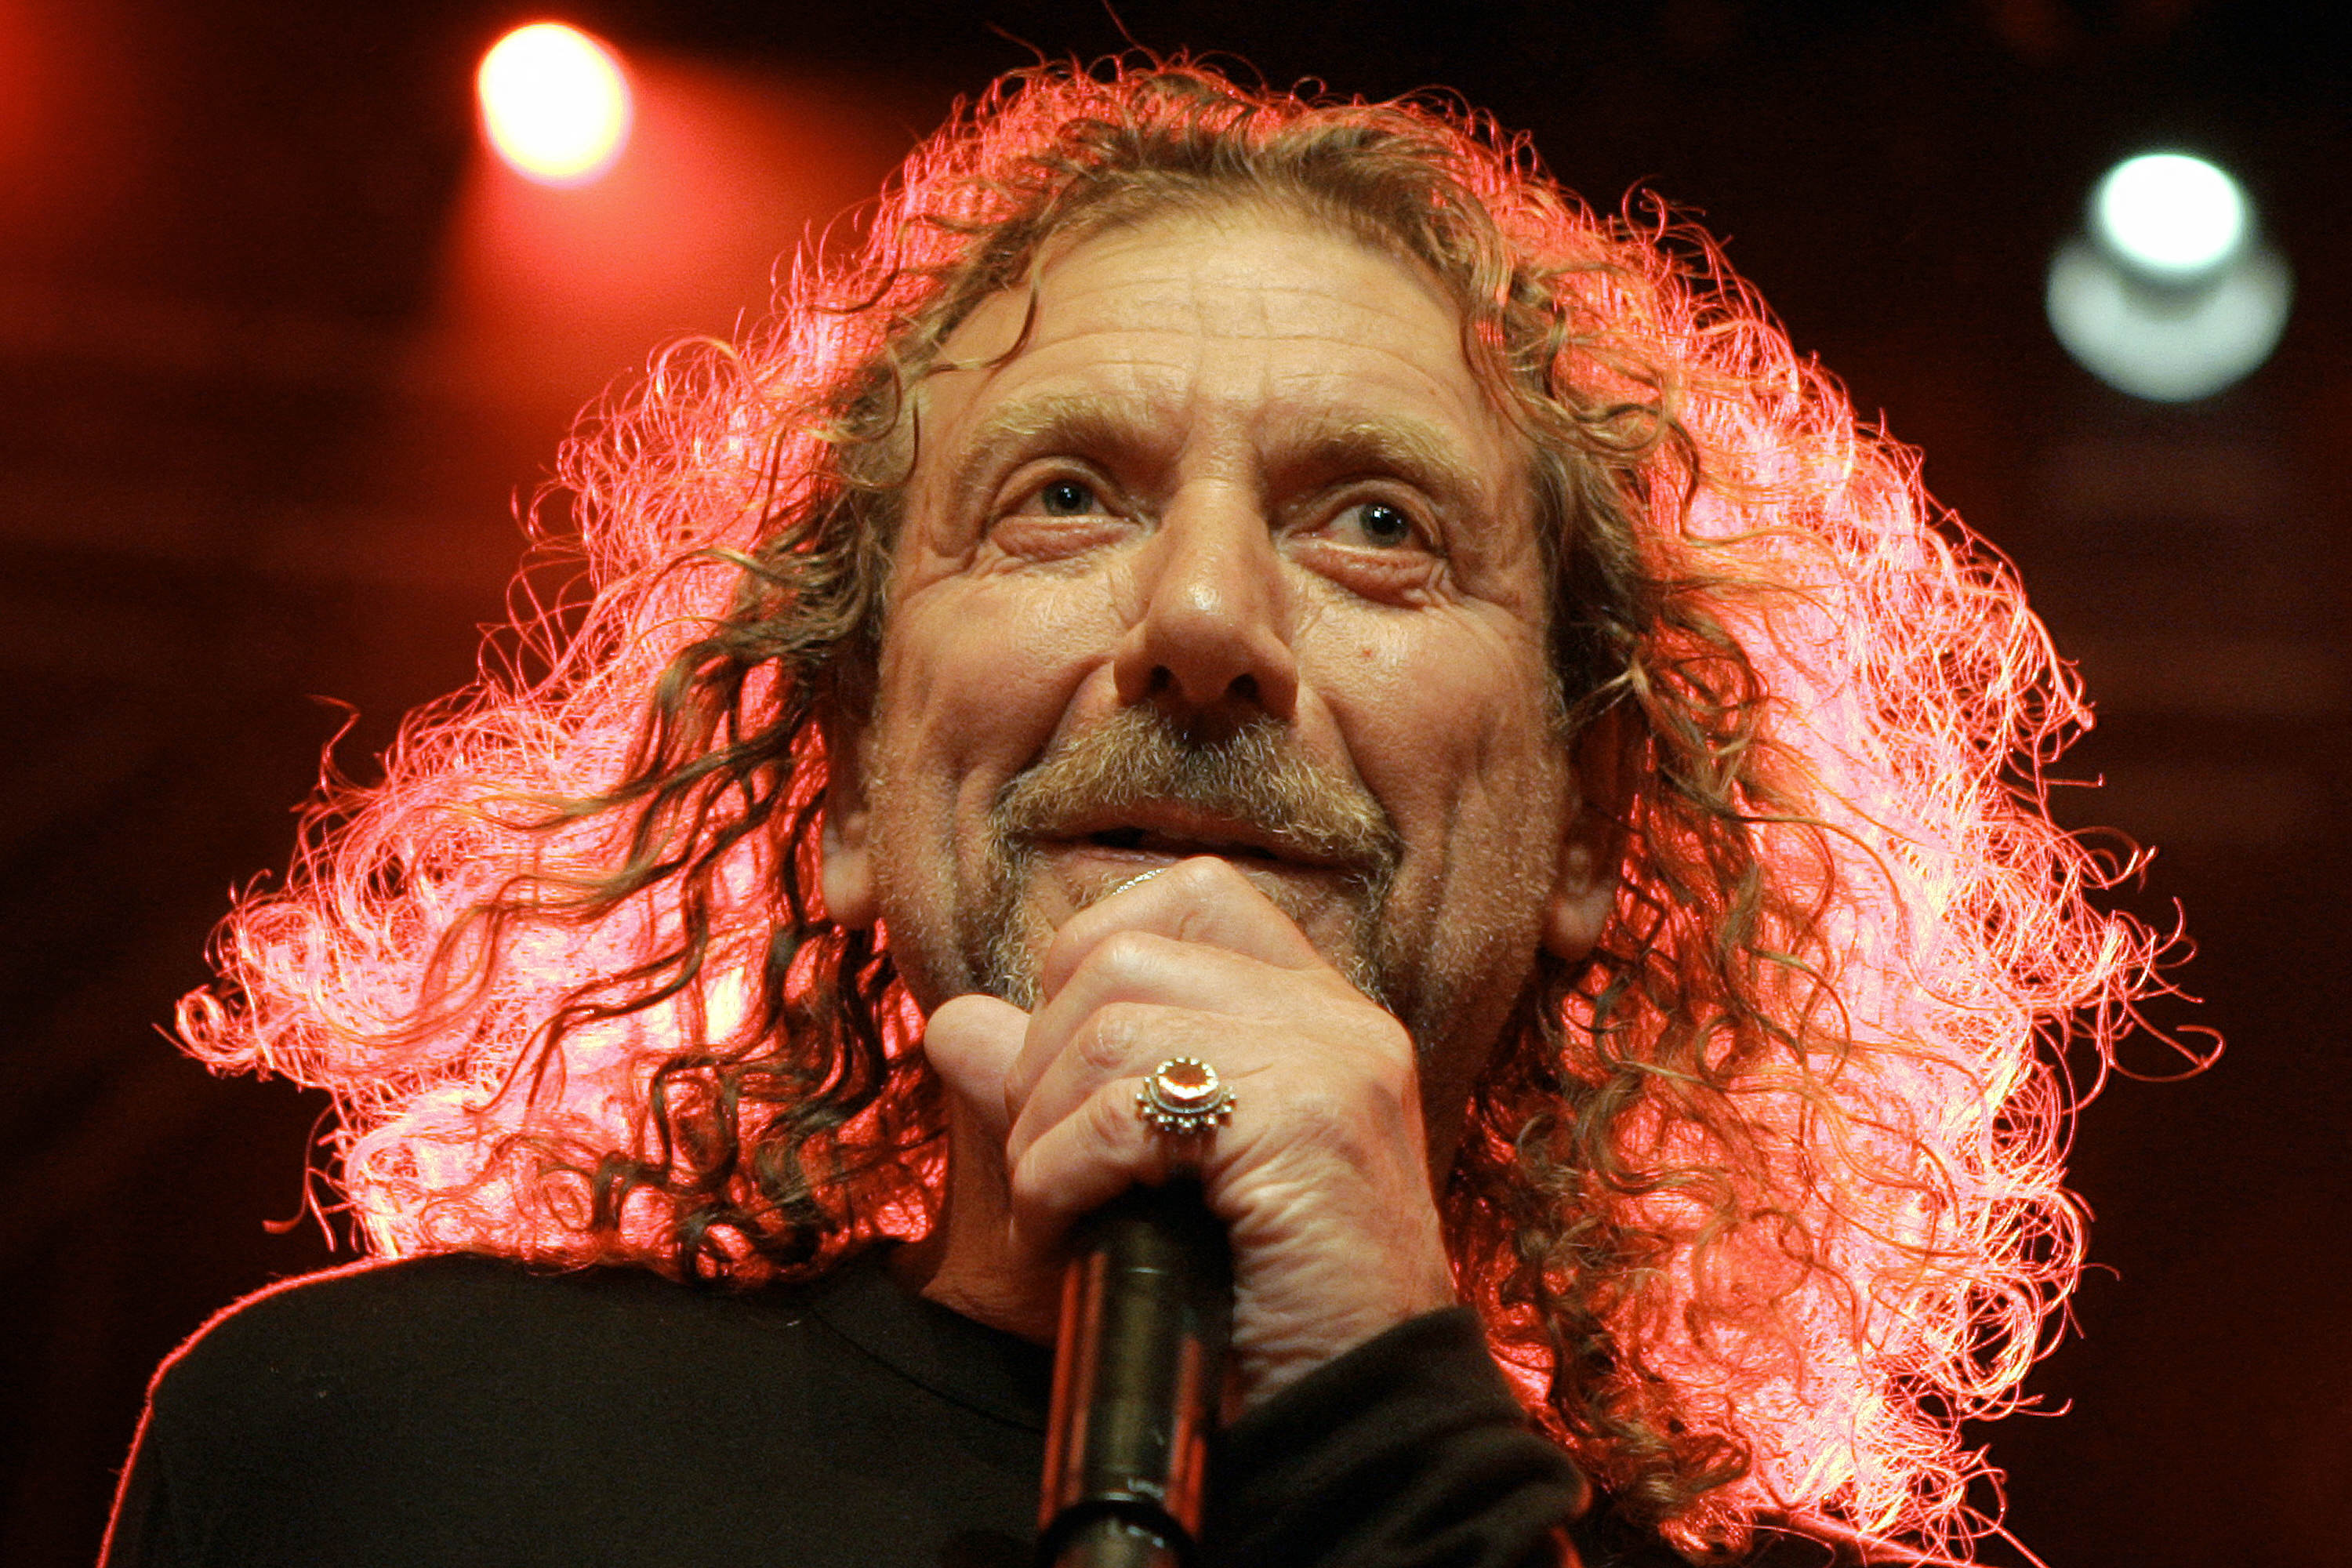 Robert Plant, during the opening night of the 40th Montreux Jazz Festival, on late June 30, 2006, in Montreux | Source: Getty Images